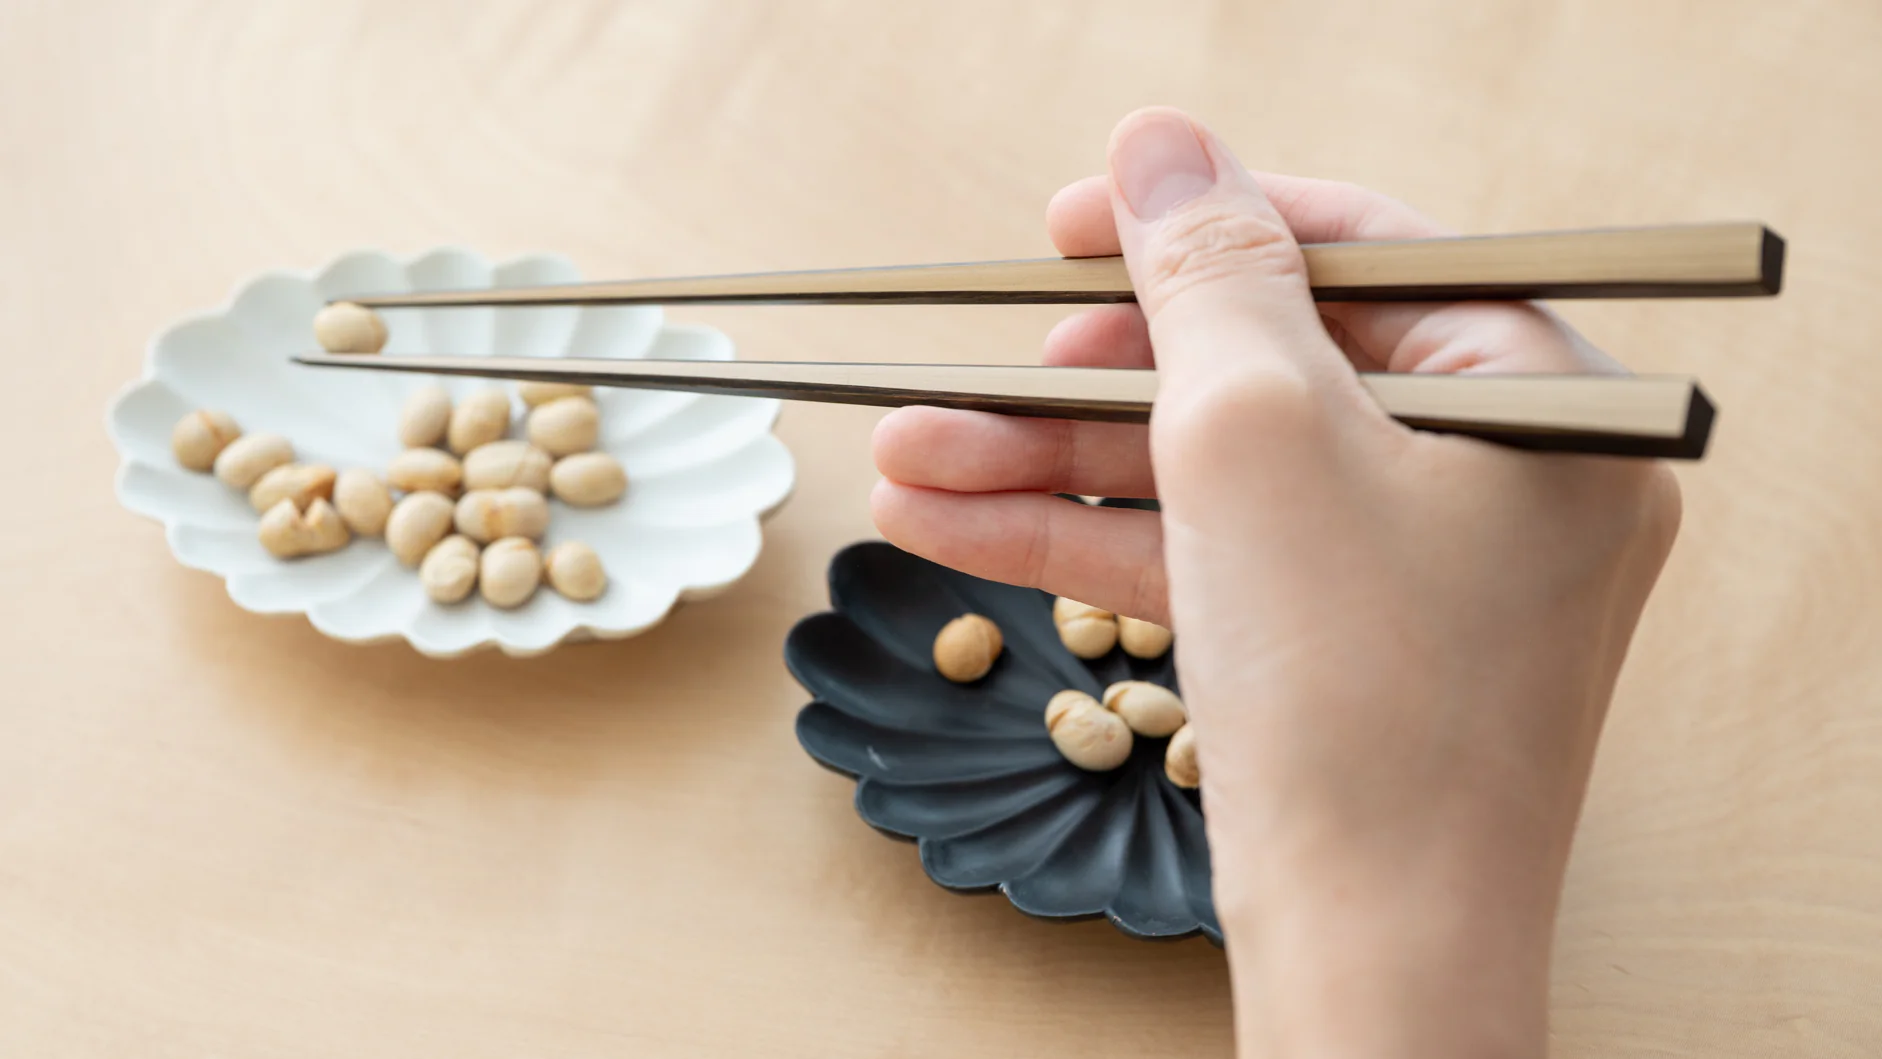 How to Use Chopsticks: Easy Steps for Beginners